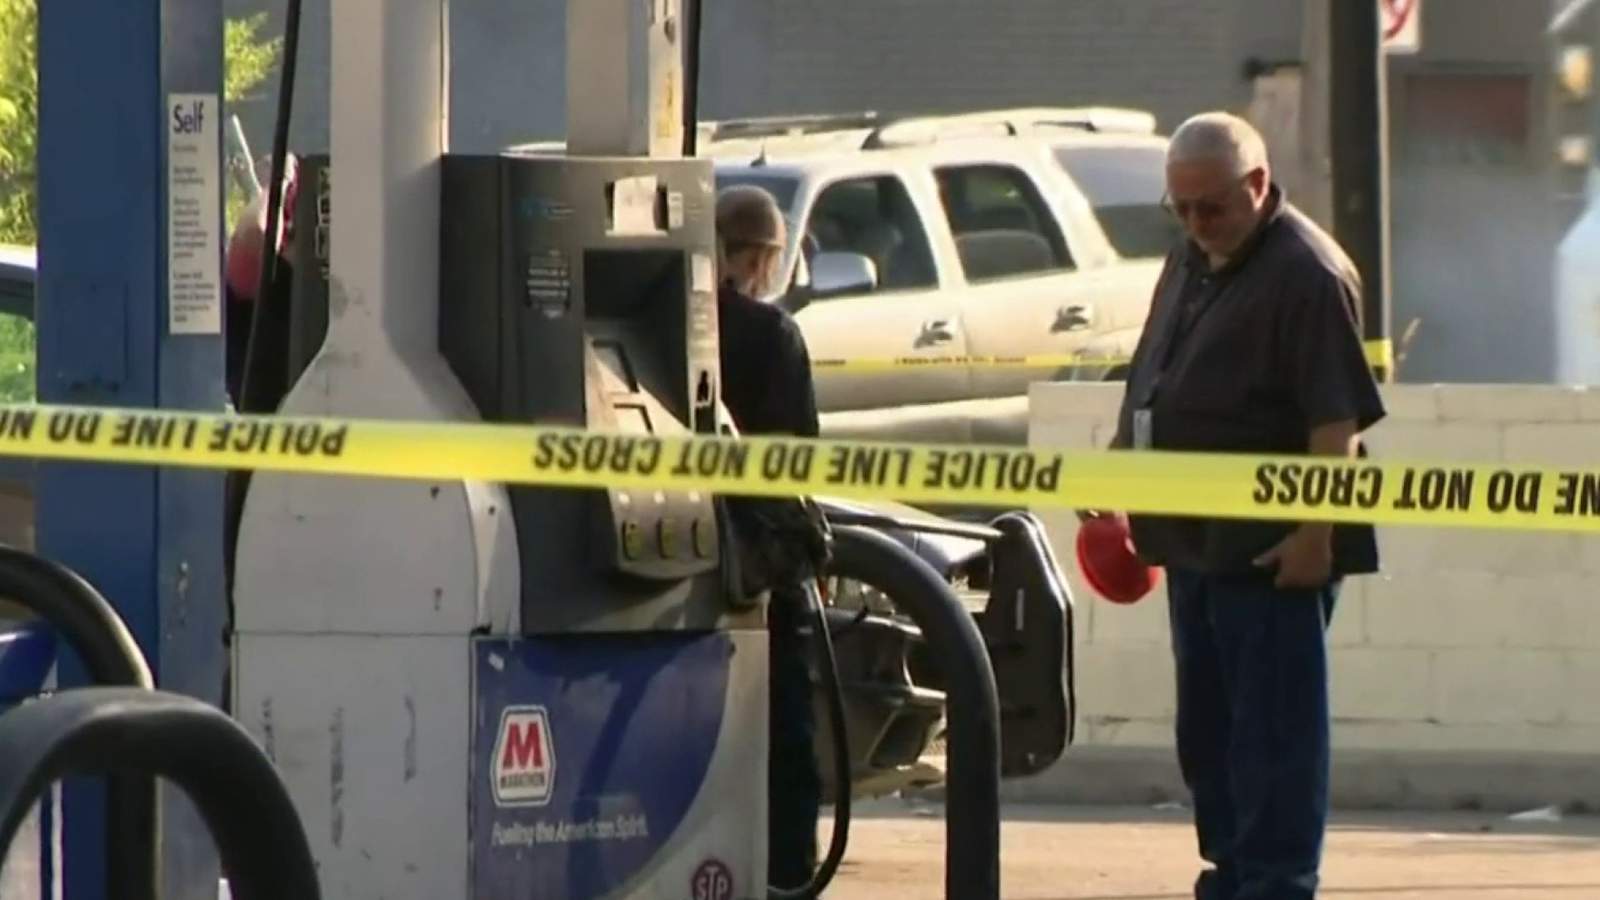 Police search for killer after more than a dozen shots fired at Detroit gas station